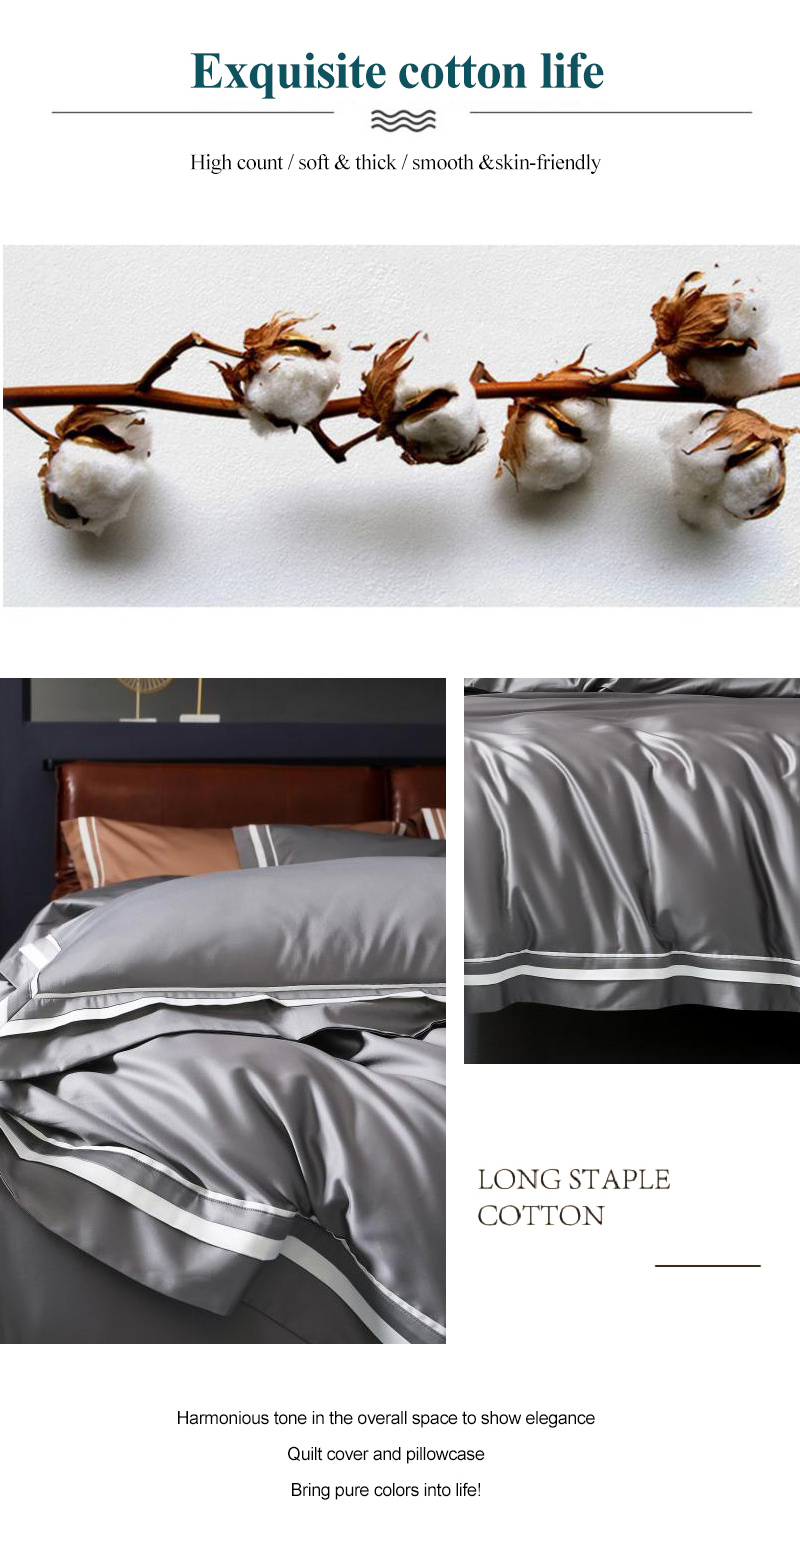 Factory Price Double Bed Soft Bedding Modern Design 1000 Thread Count